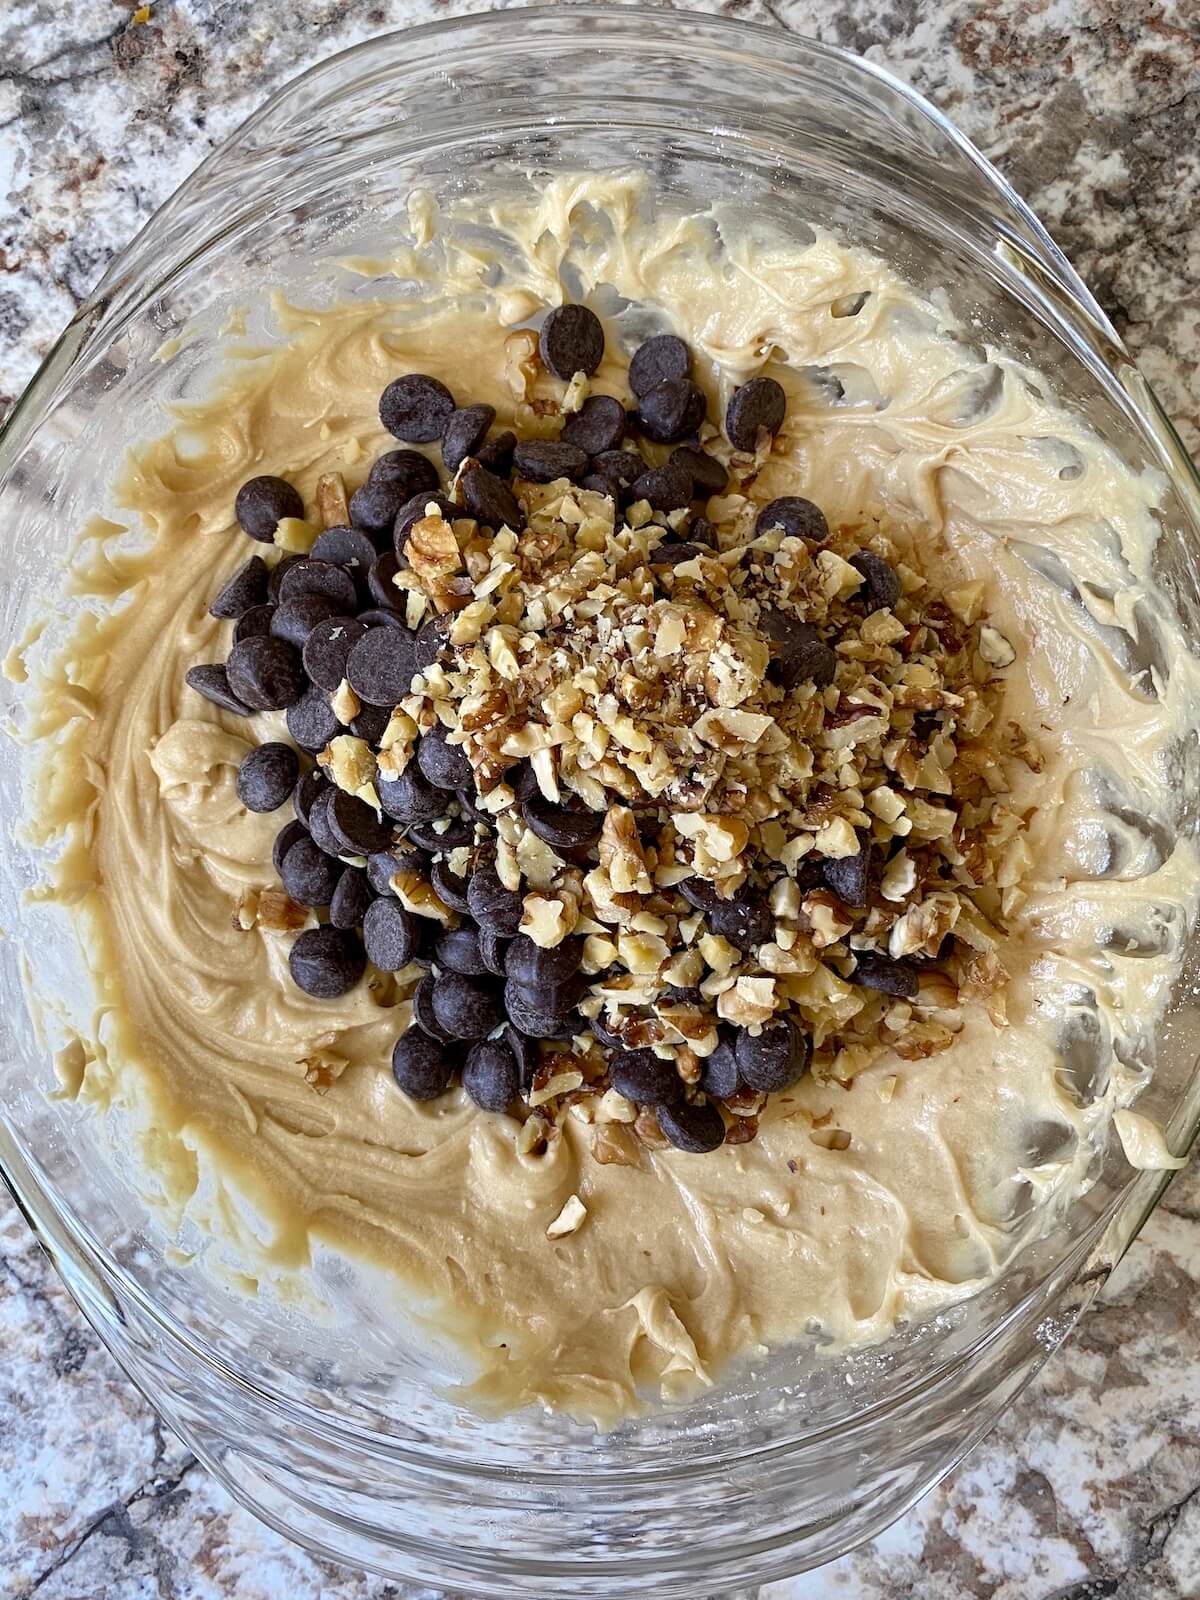 The cookie batter with chocolate chips and walnuts on top, prior to being fully mixed in.